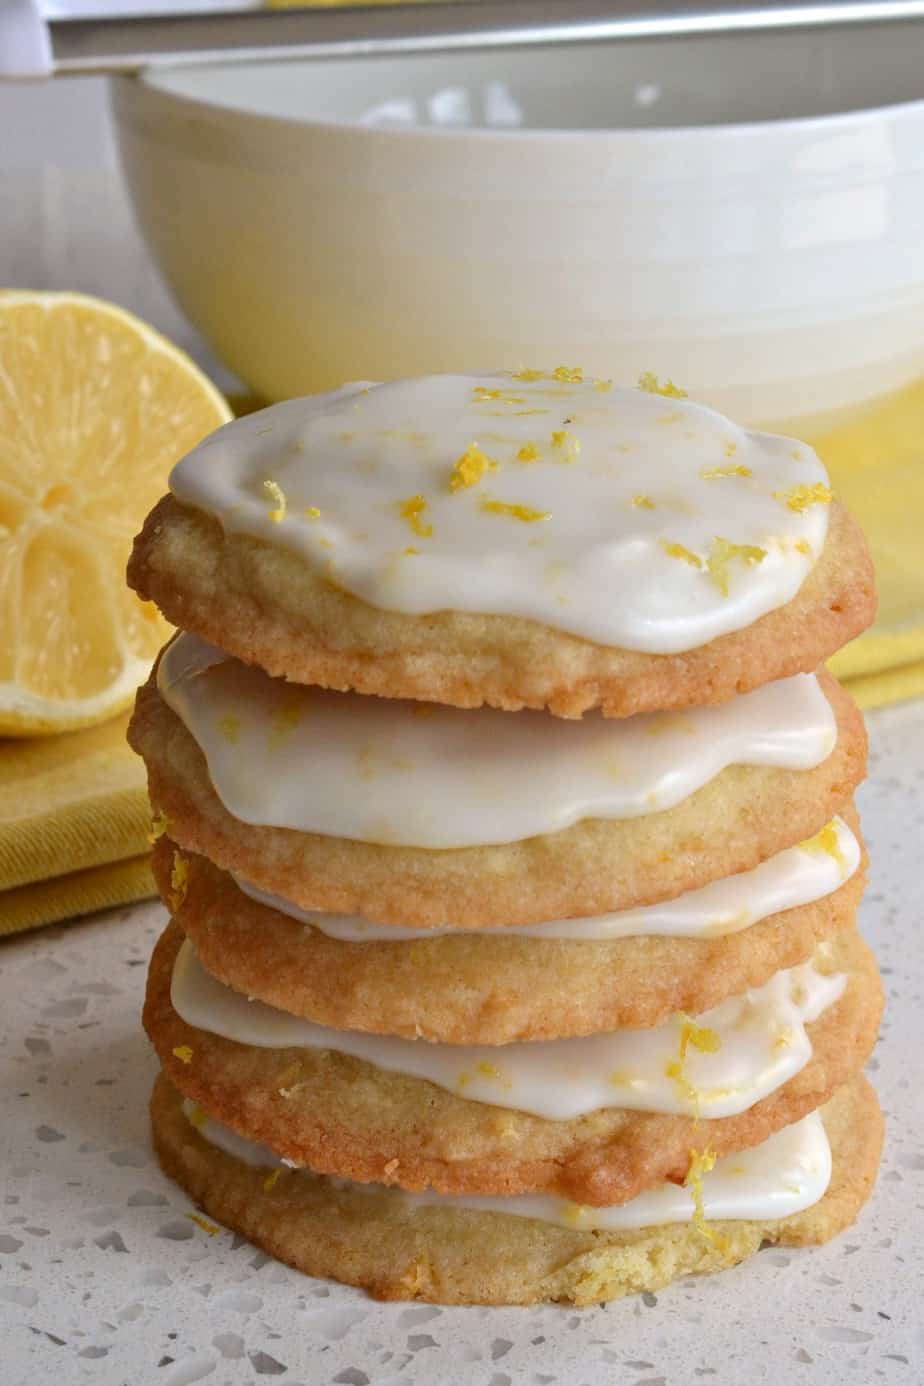 Iced Lemon Cookies are soft on the inside with slightly crispy edges all topped with a four ingredient sweet lemon glaze.